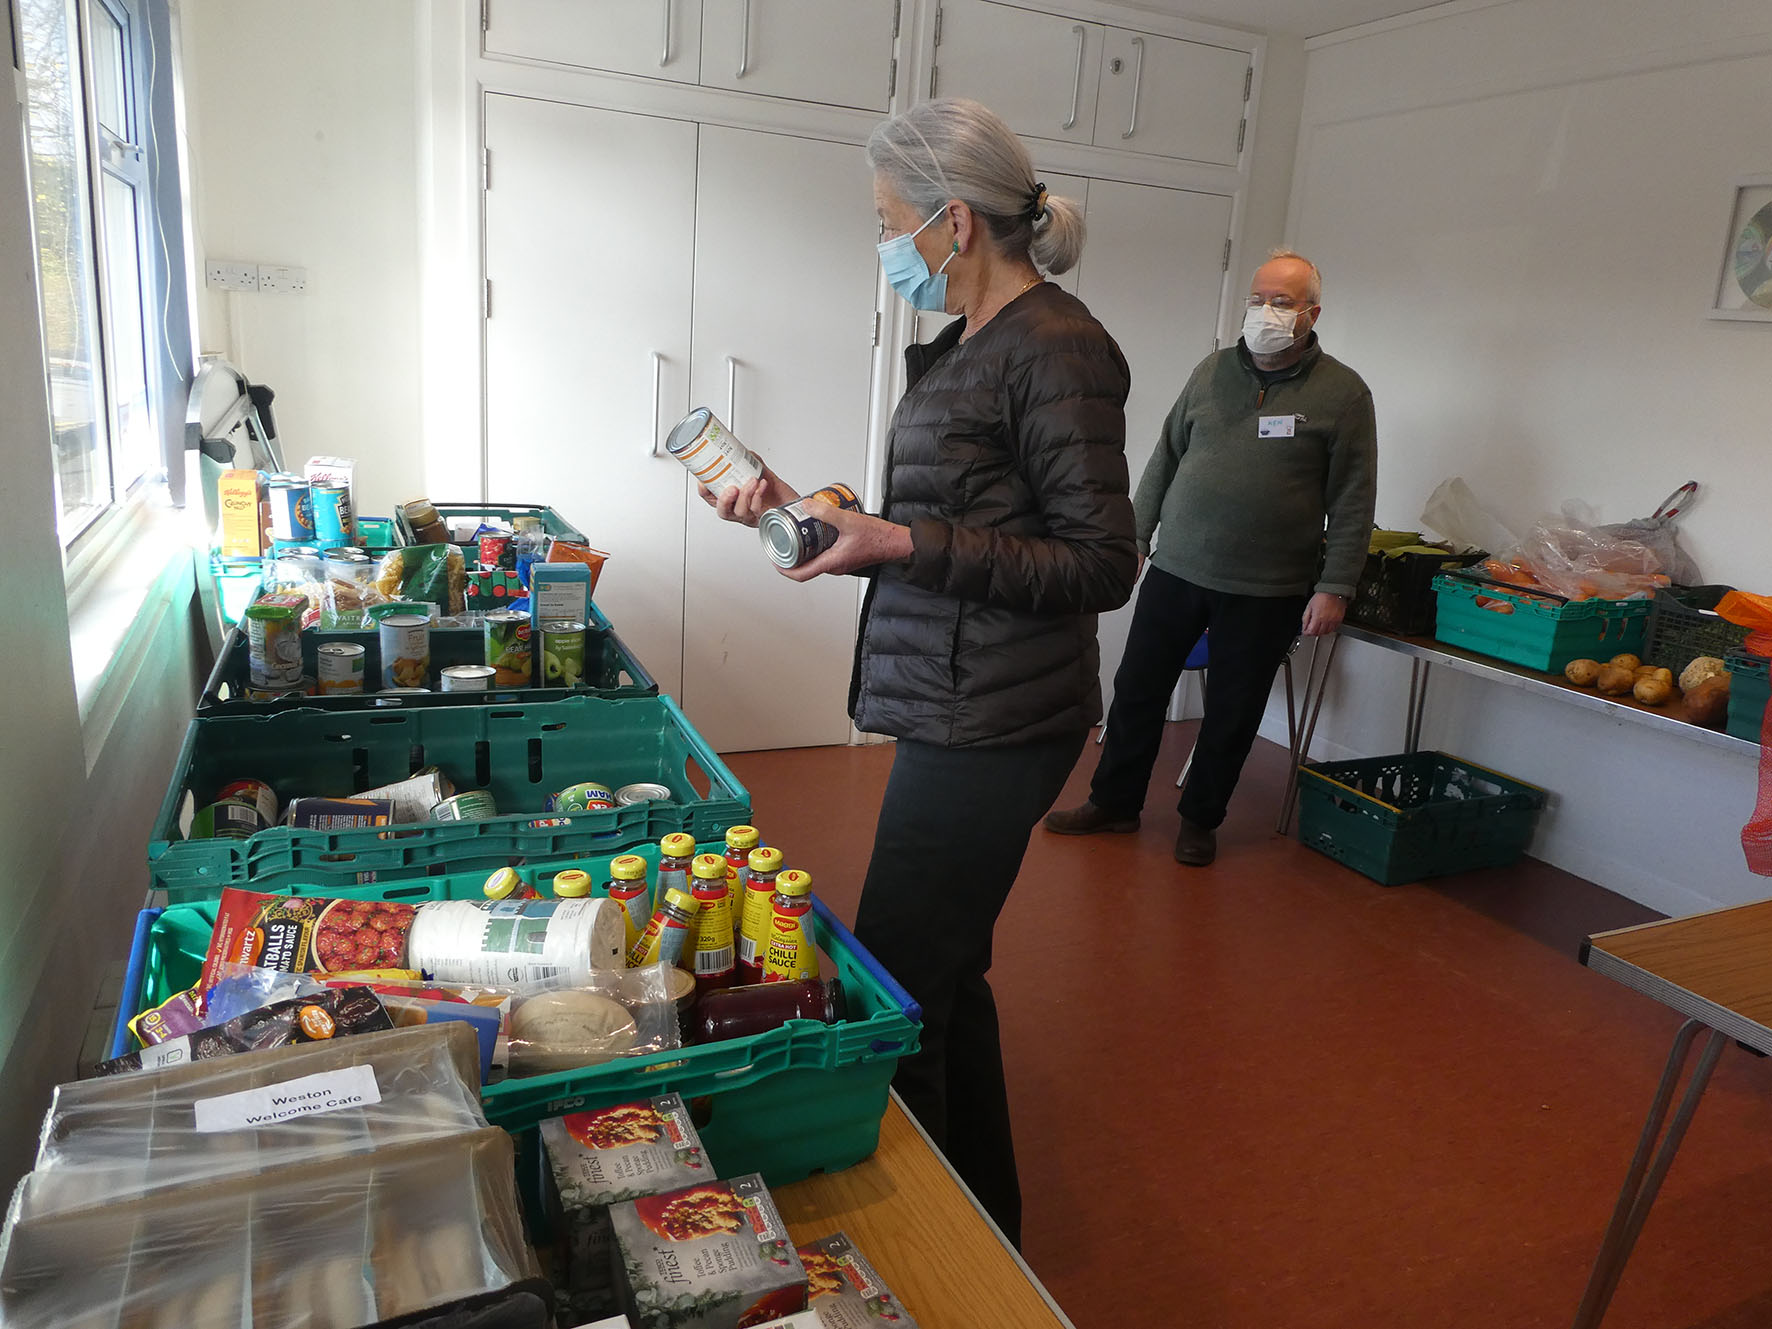 Elder white woman and elder white man wearing disposable medical masks. She carries two tins to a long table covered in large green plastic crates. In the crates is food, some tins, some jars, bottles and packets.ow. The